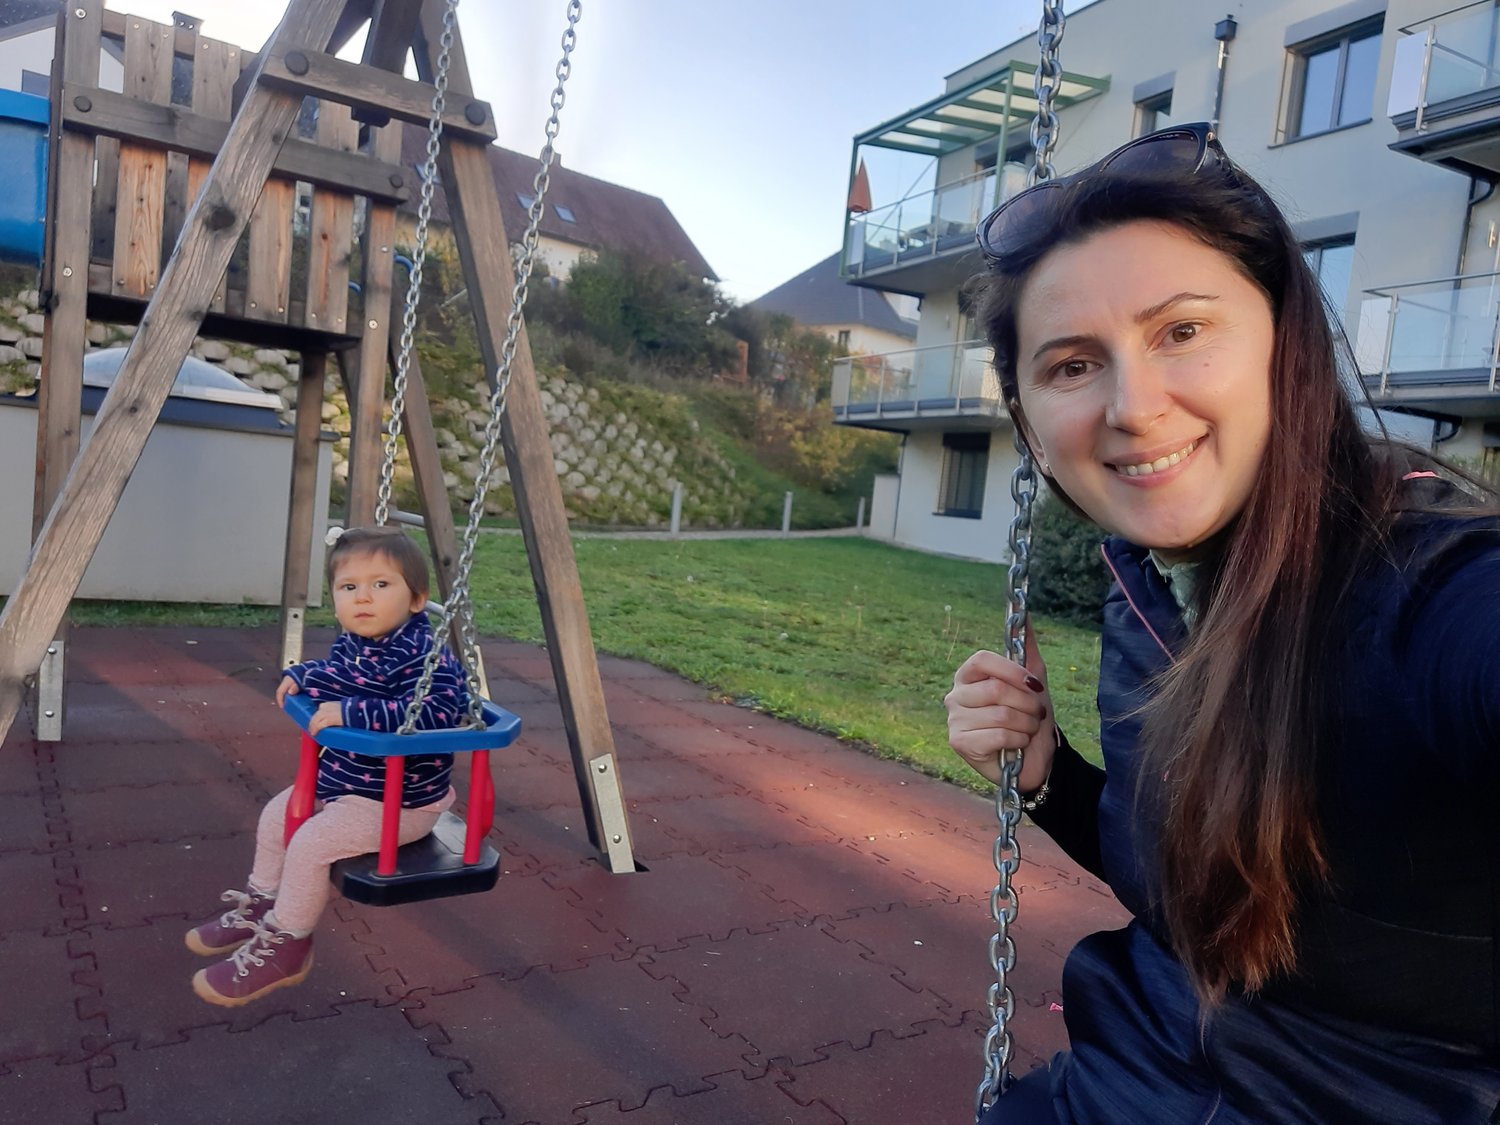 Fjolla and her daughter on a swing in front of their home